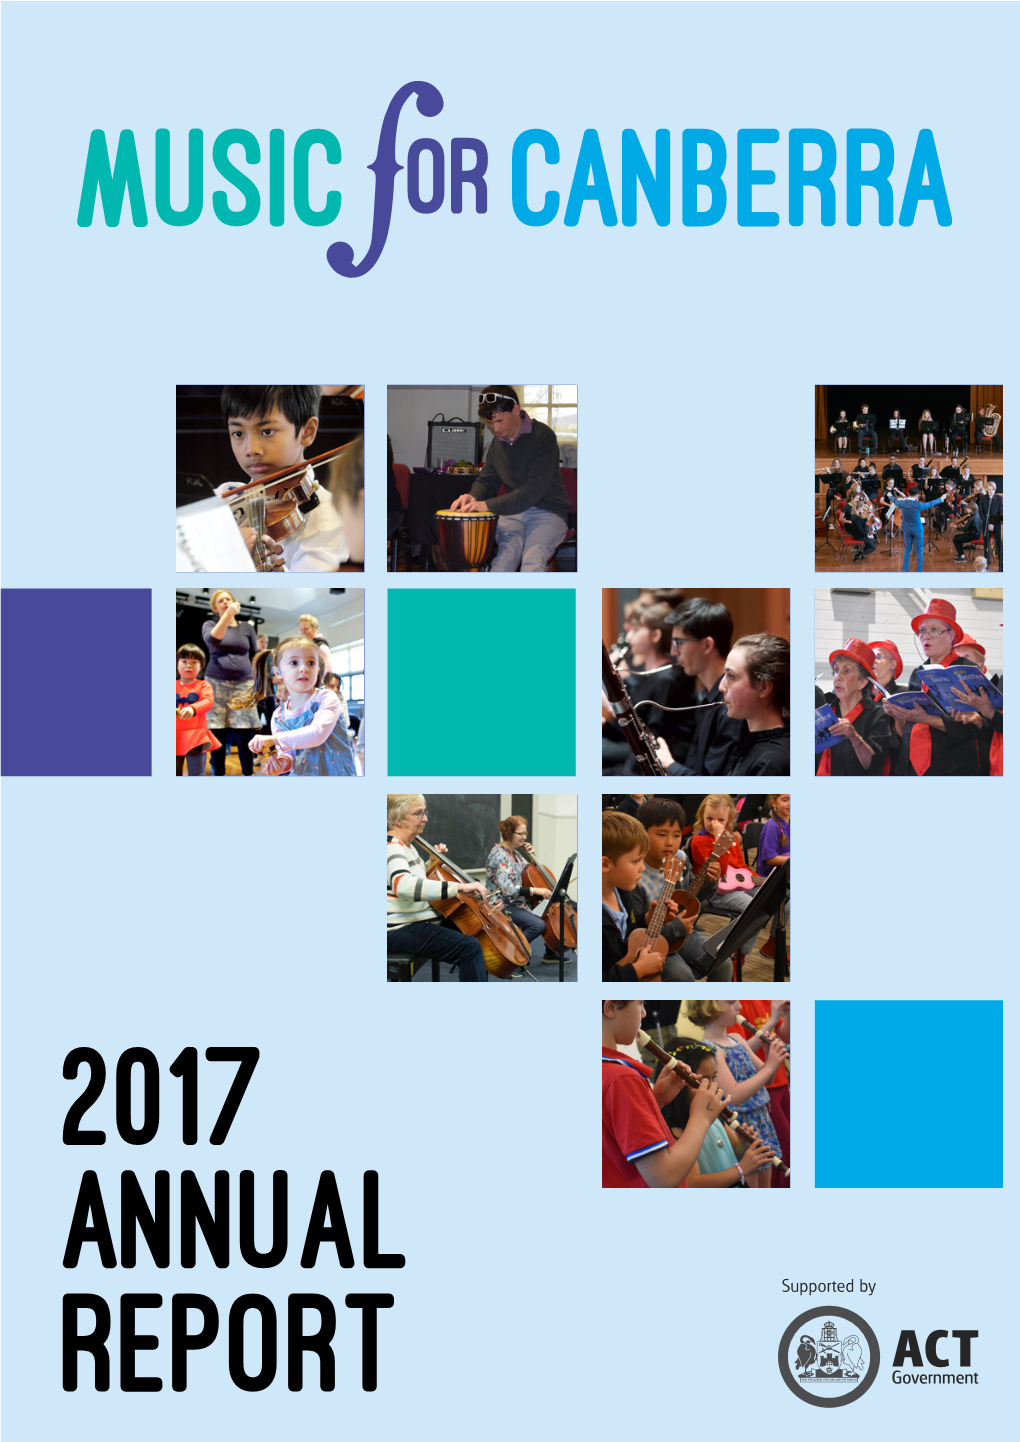 Music for Canberra 2017 Annual Report